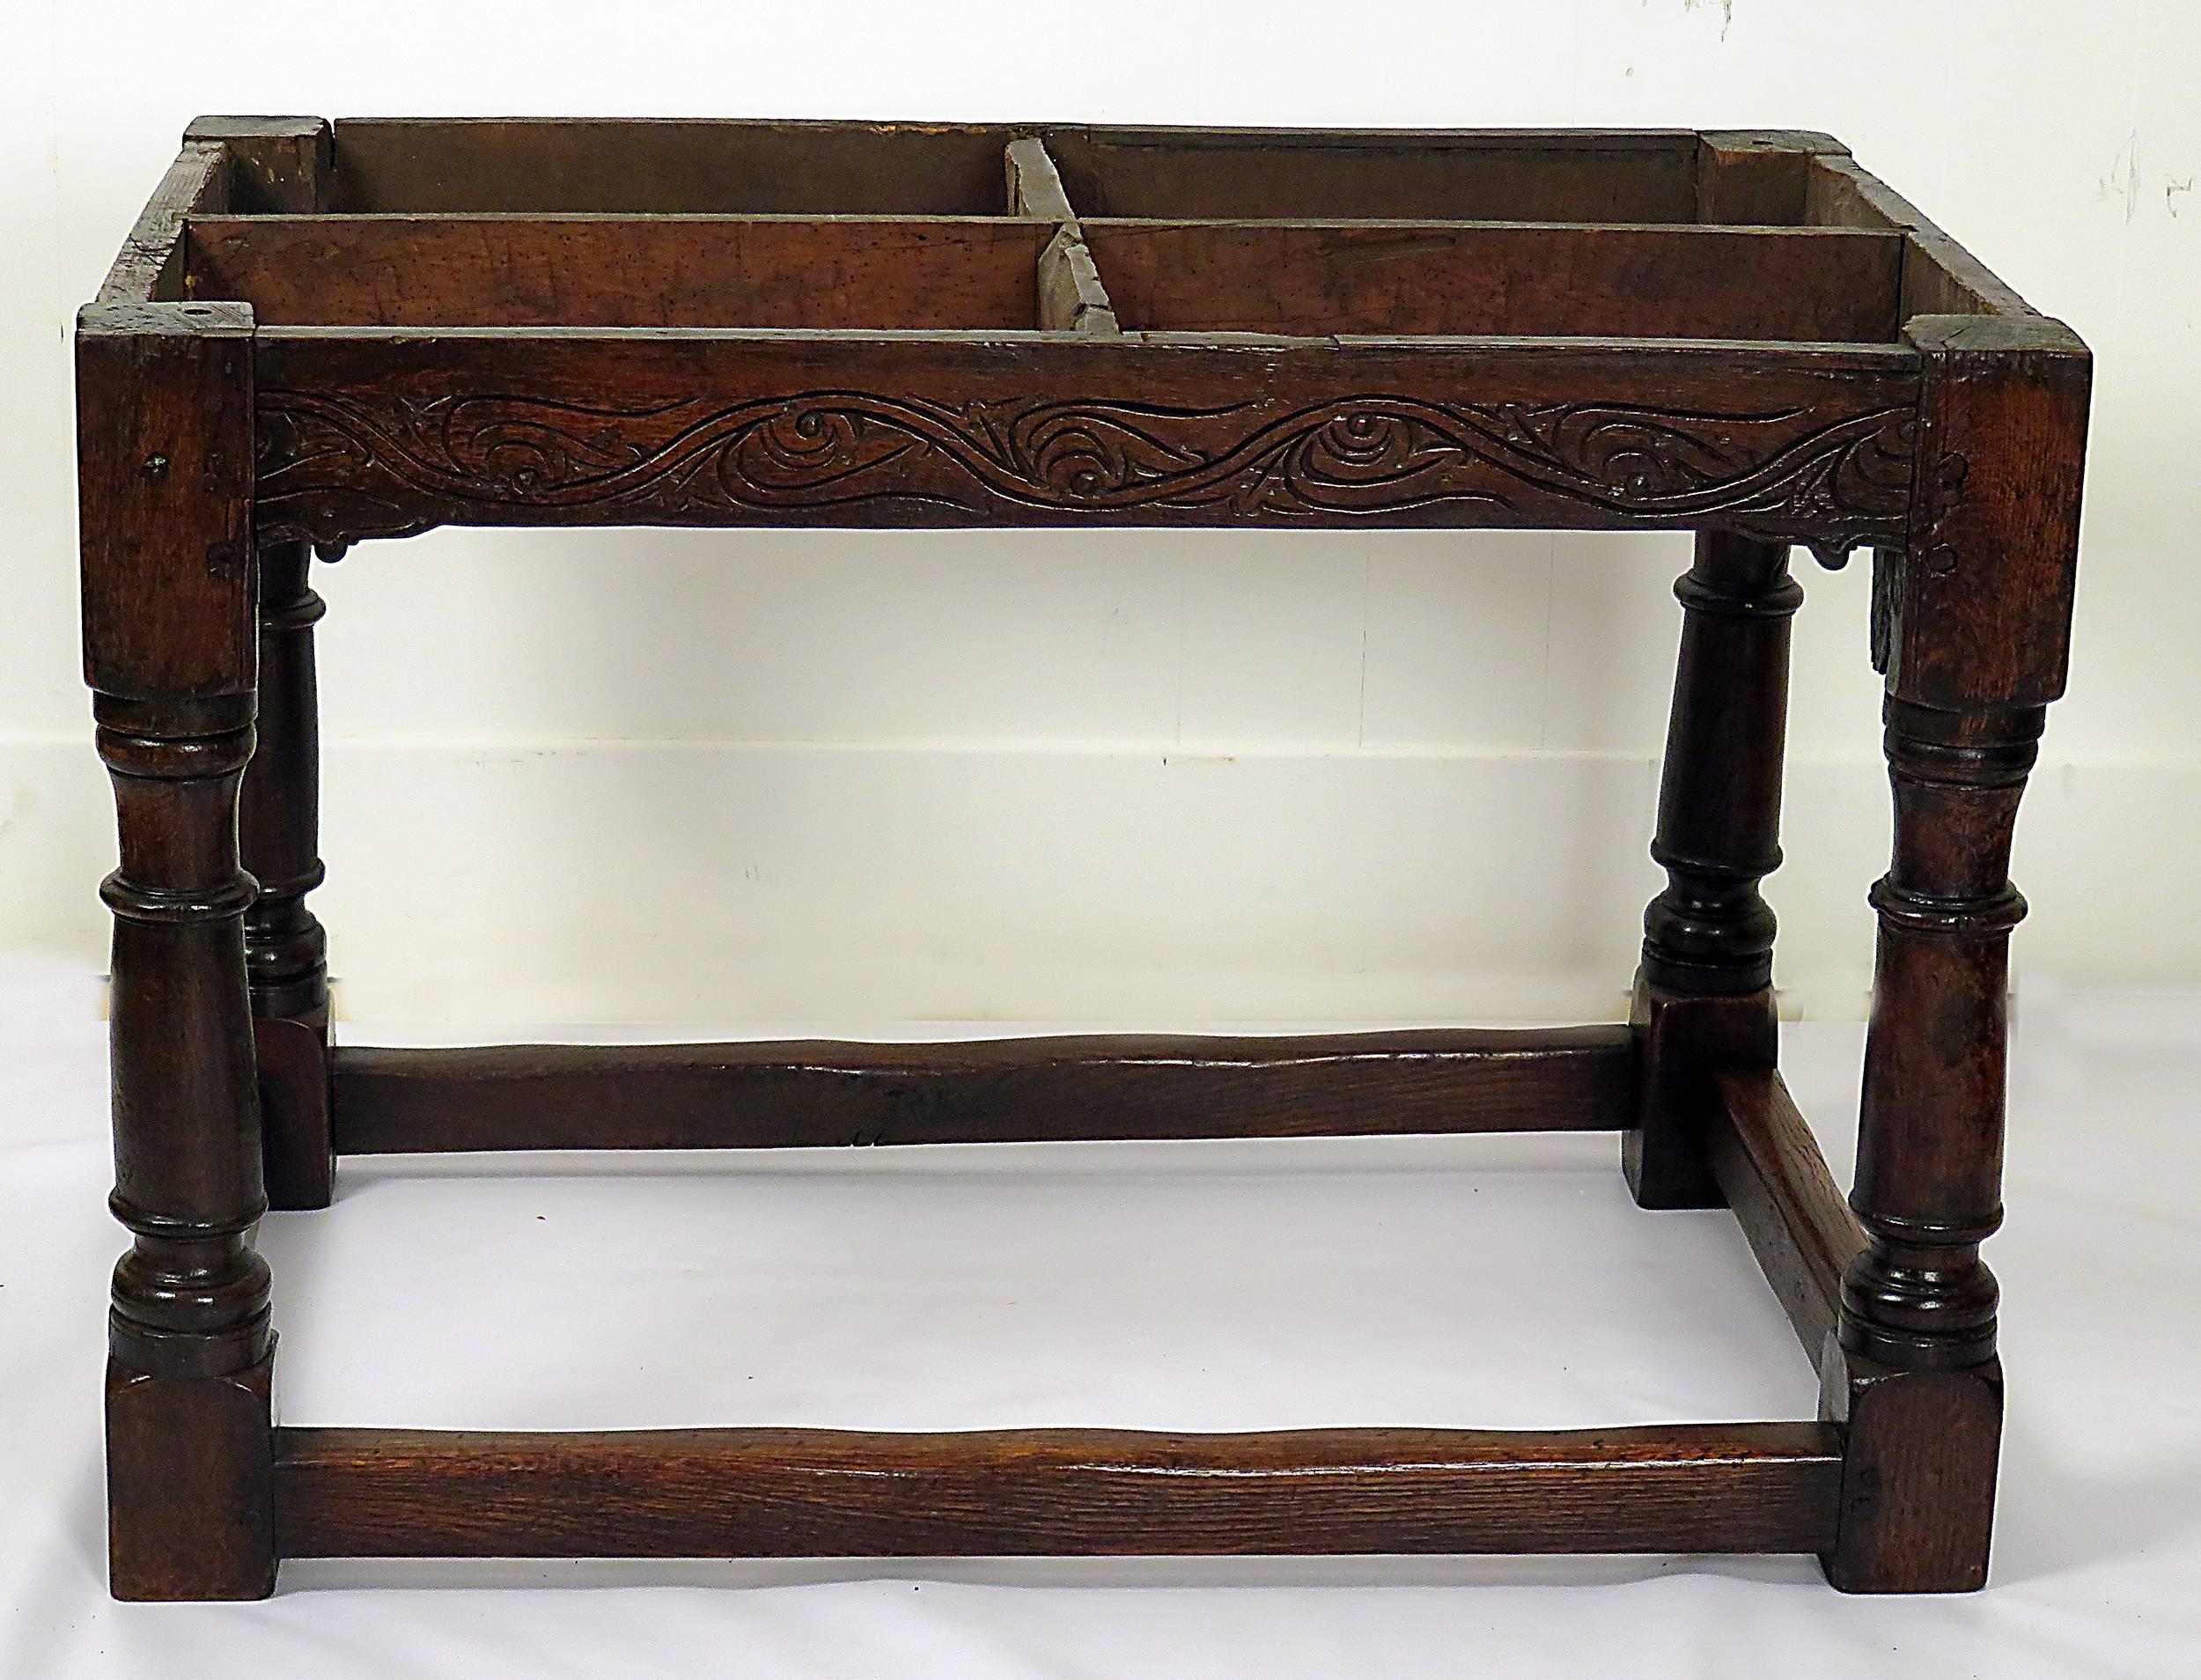 Italian Nice Old Tavern or Work Table, Chestnut Made in Italy or Spain, circa 1780  